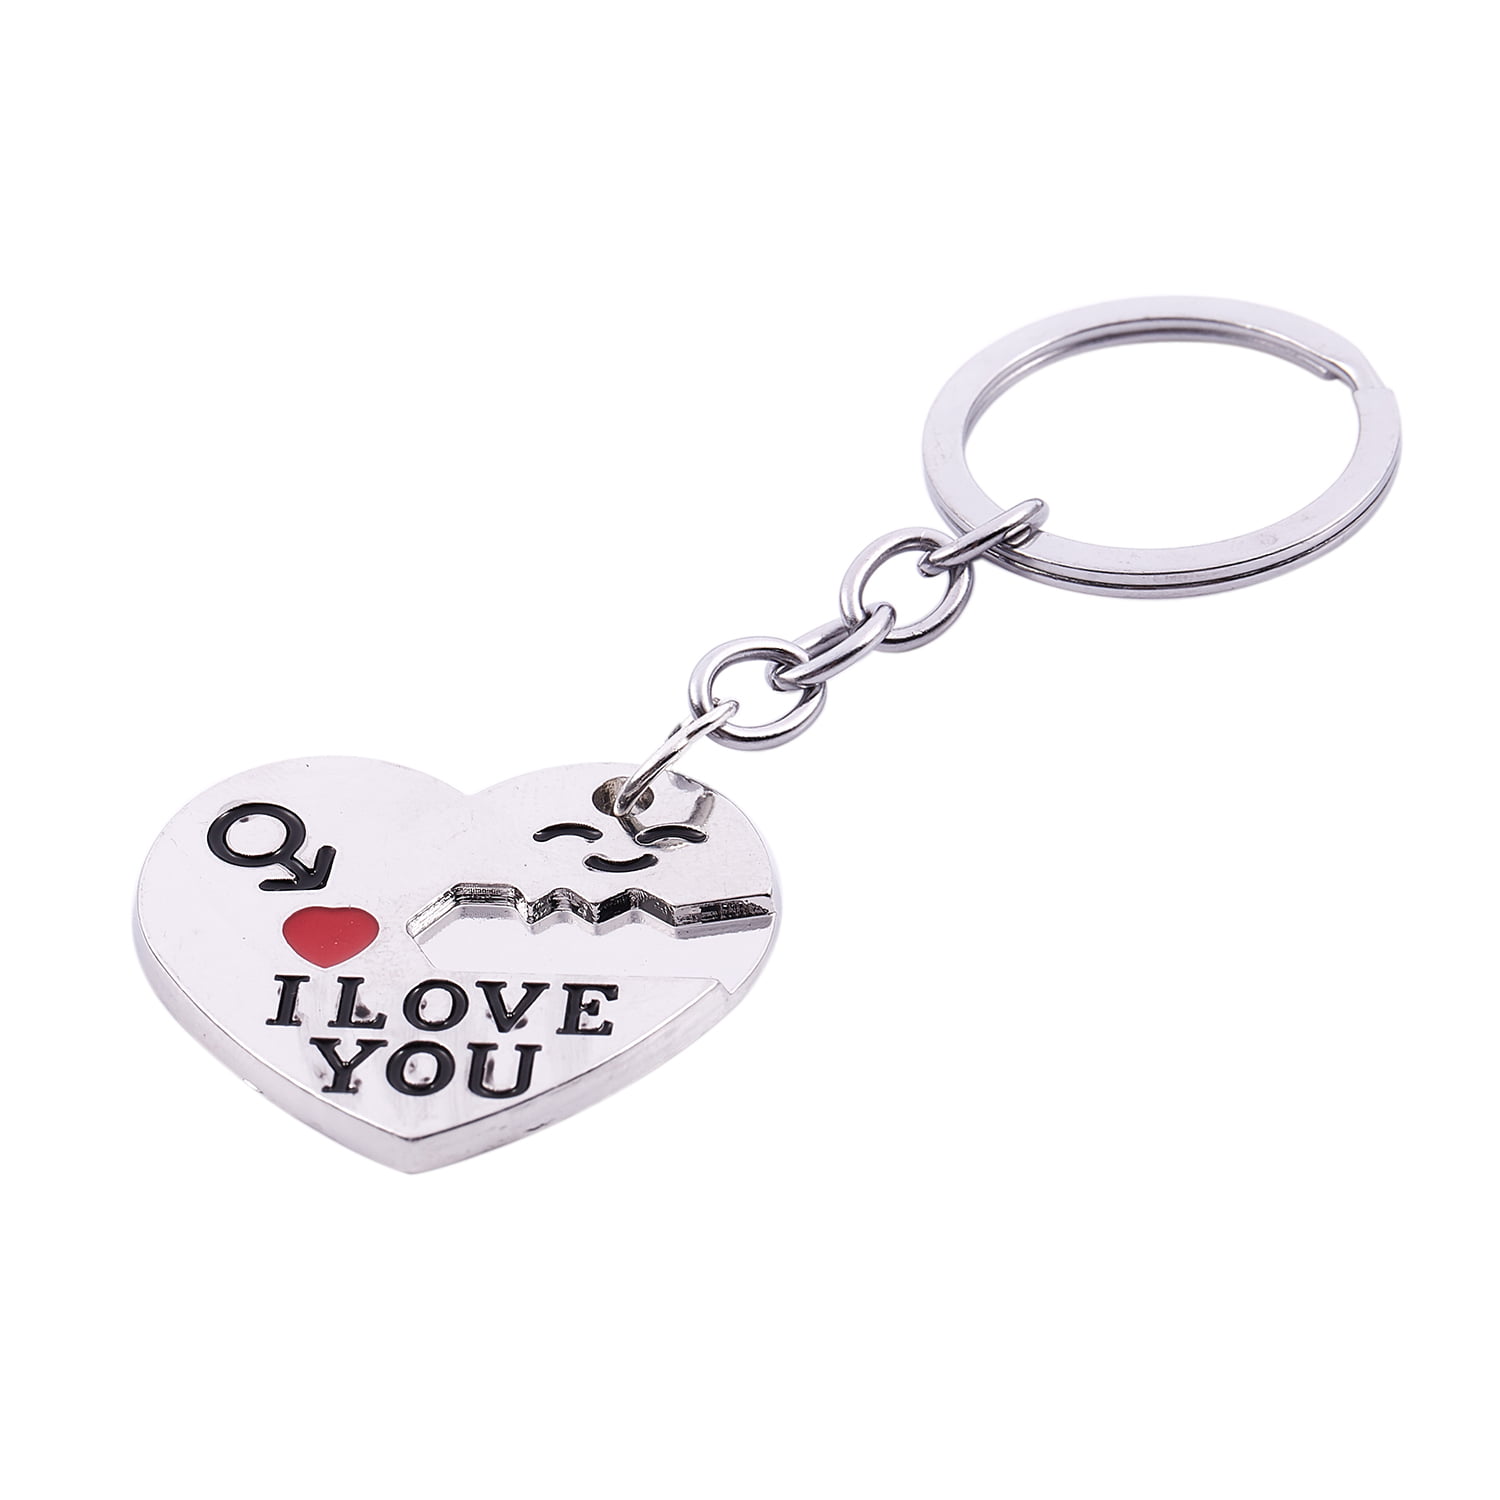 Lover His Her Keychain Keyring Couples Arrow& "I Love You" Heart & Key `xh 